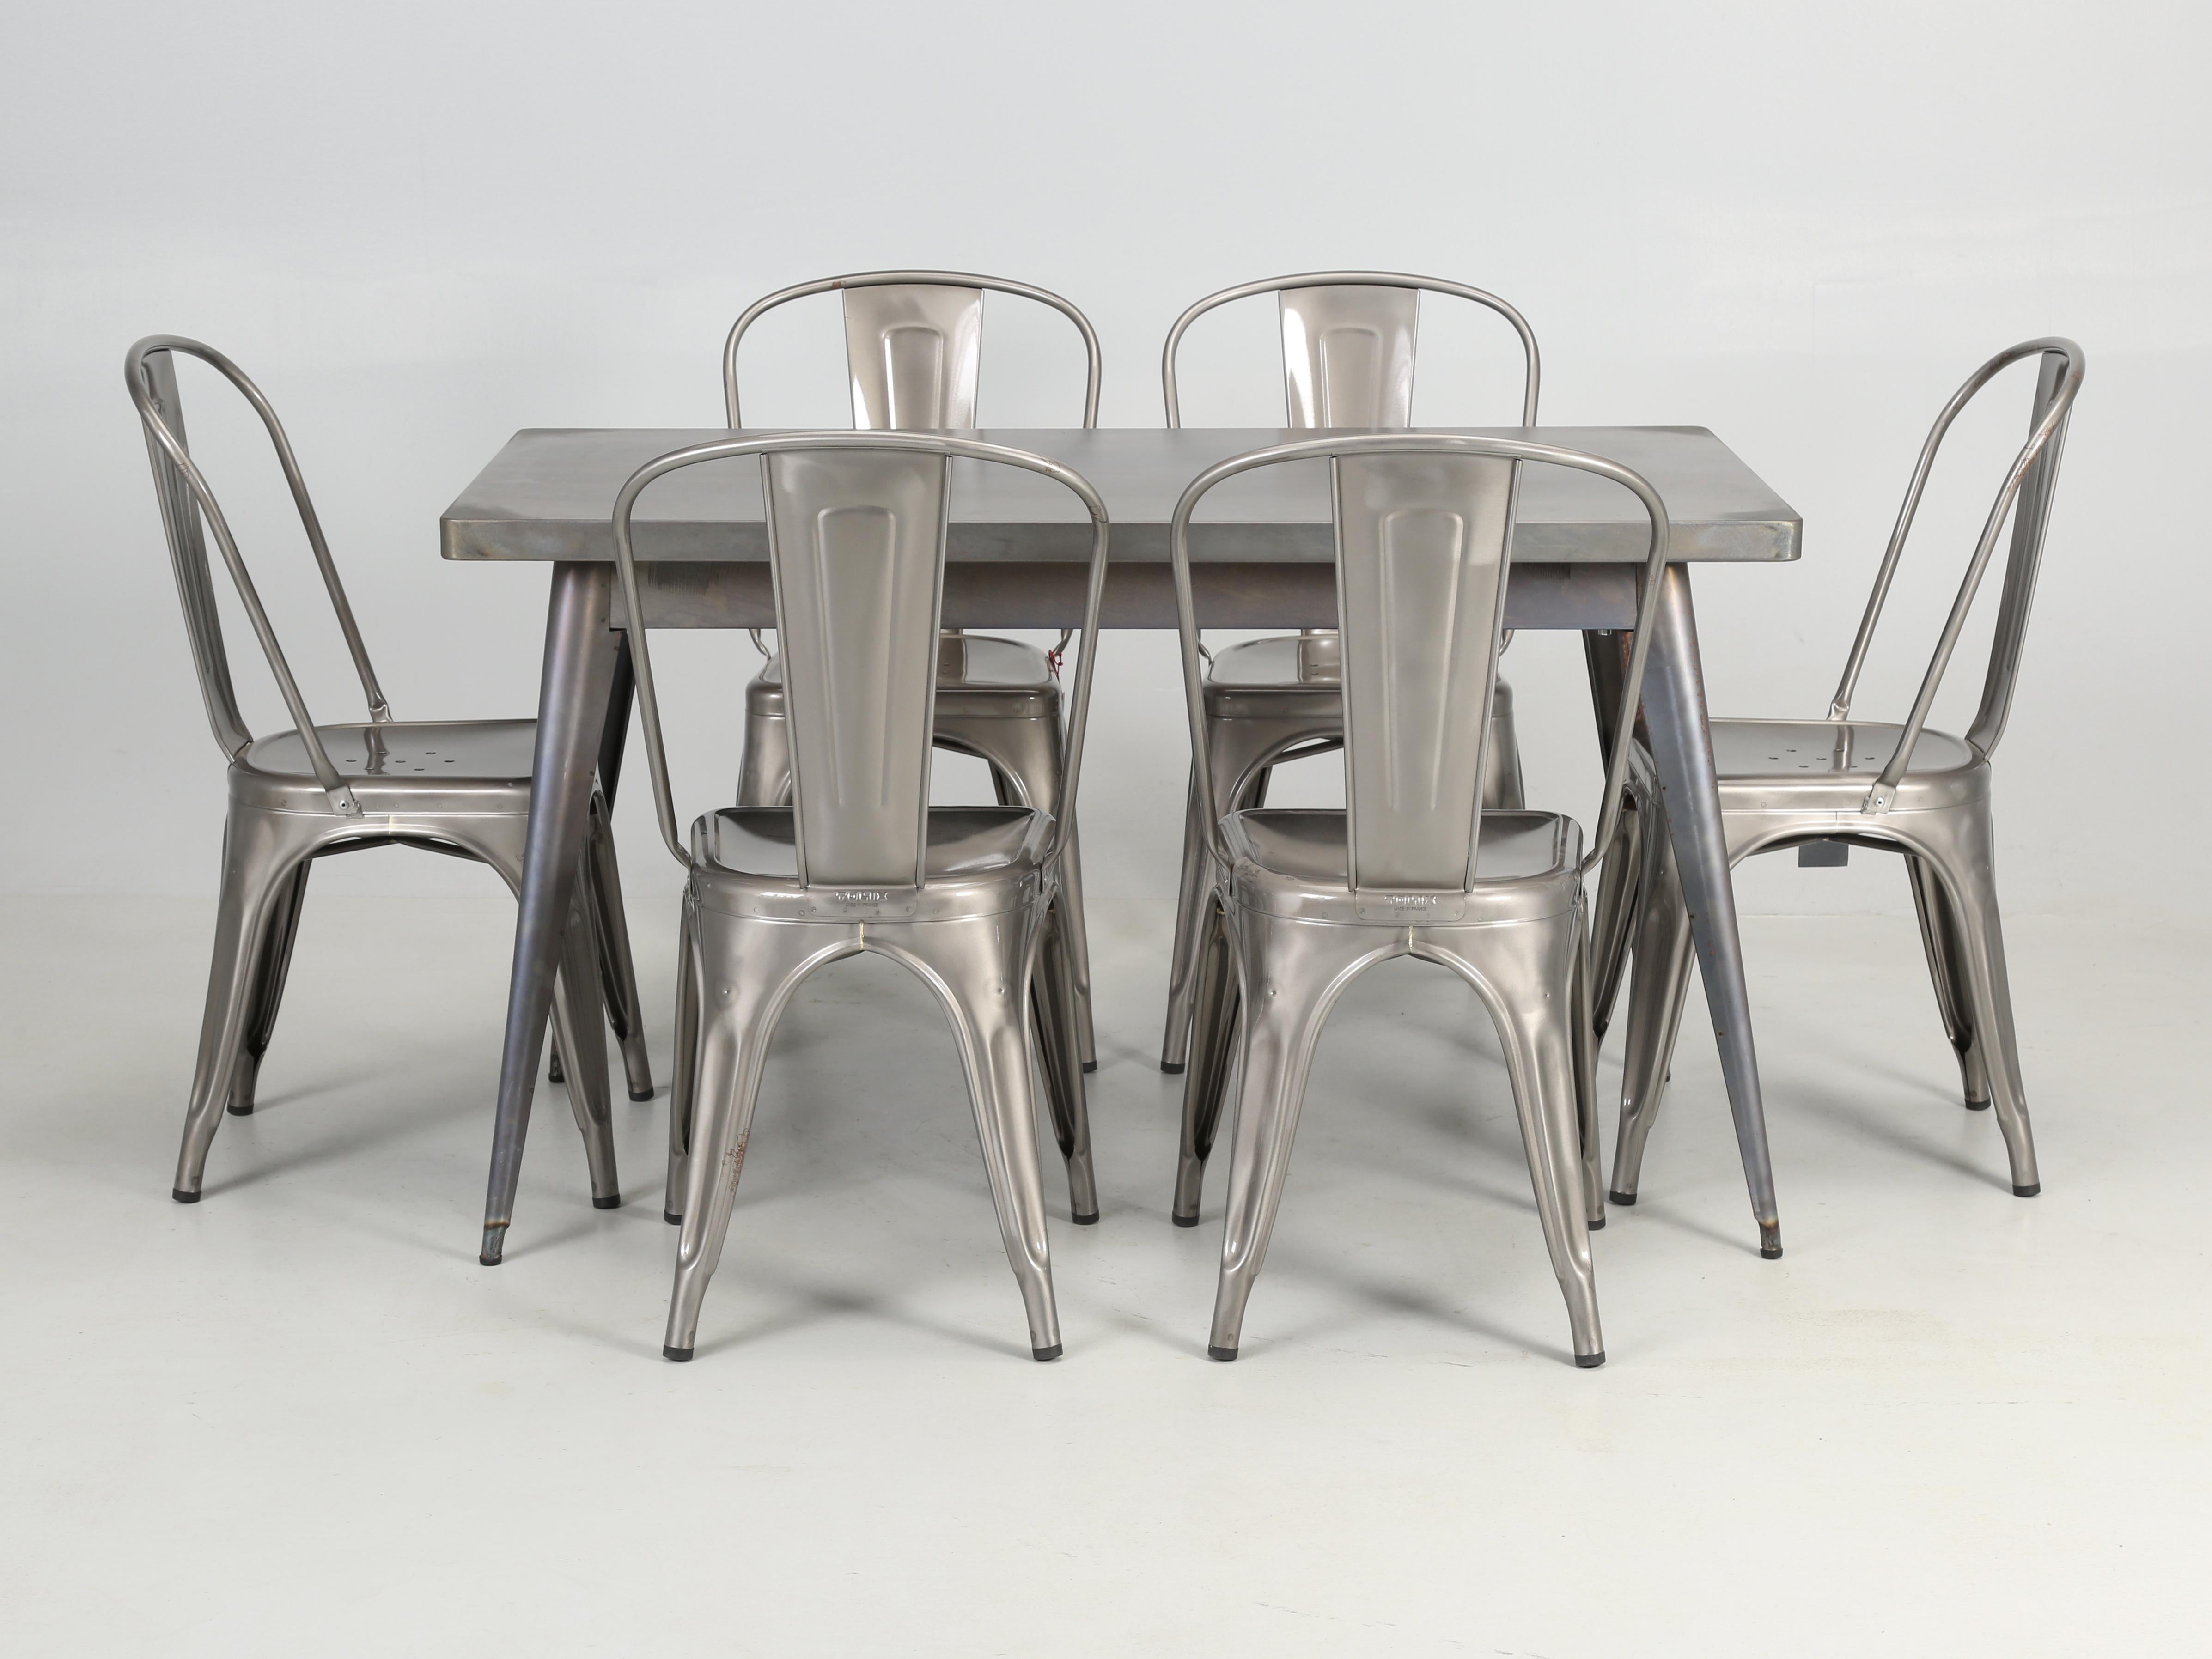 Original French T55 Tolix Rectangular Dining Table – 51.2” x 27.5” (130cm 70cm) with matching set of (6) Tolix steel stacking chairs. Our Tolix indoor-outdoor dining table is made from raw steel with no protective coating and has been sitting in a